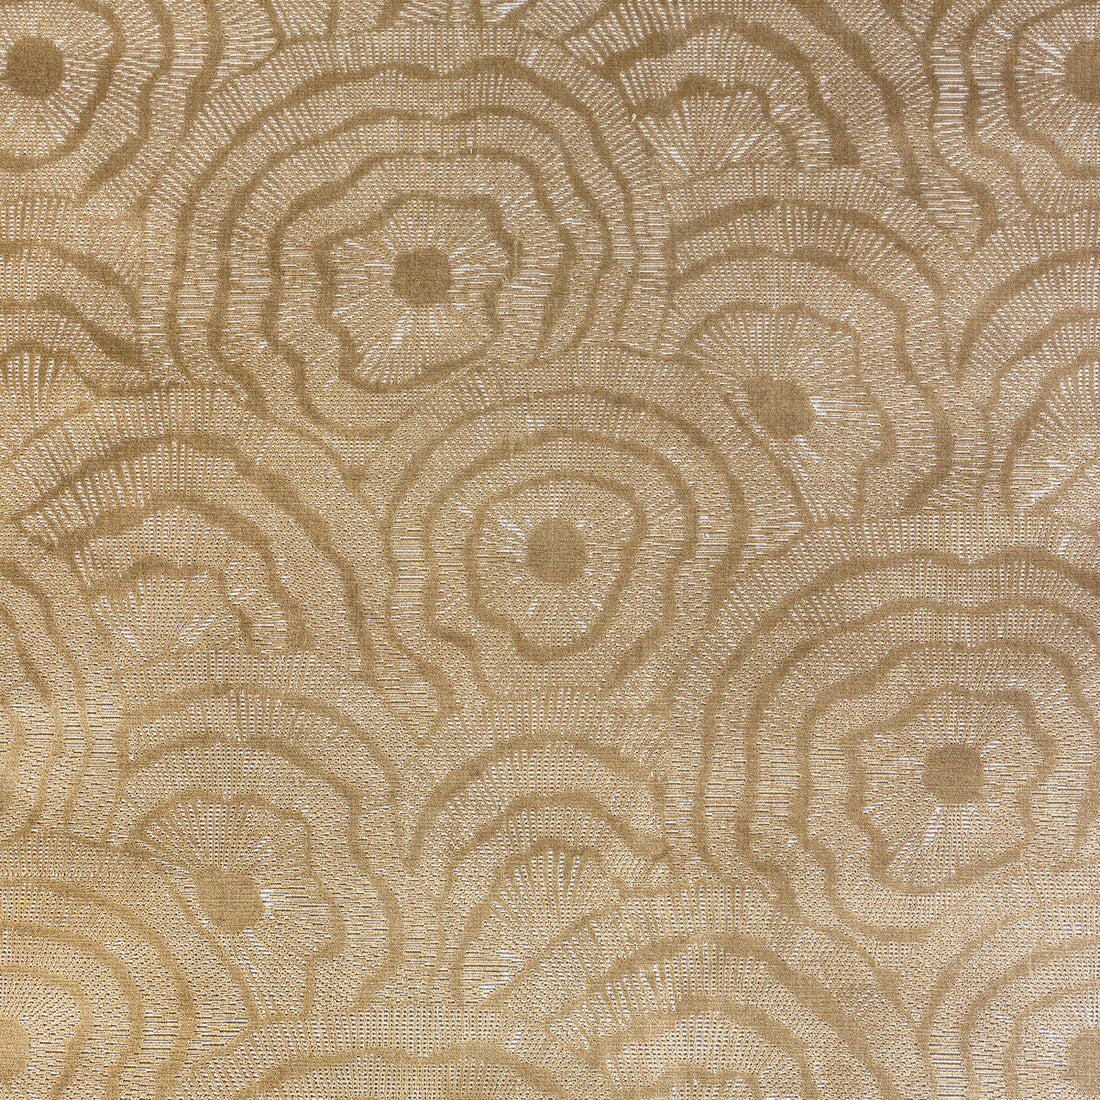 Panache Velvet fabric in gold color - pattern 36366.416.0 - by Kravet Couture in the Corey Damen Jenkins Trad Nouveau collection